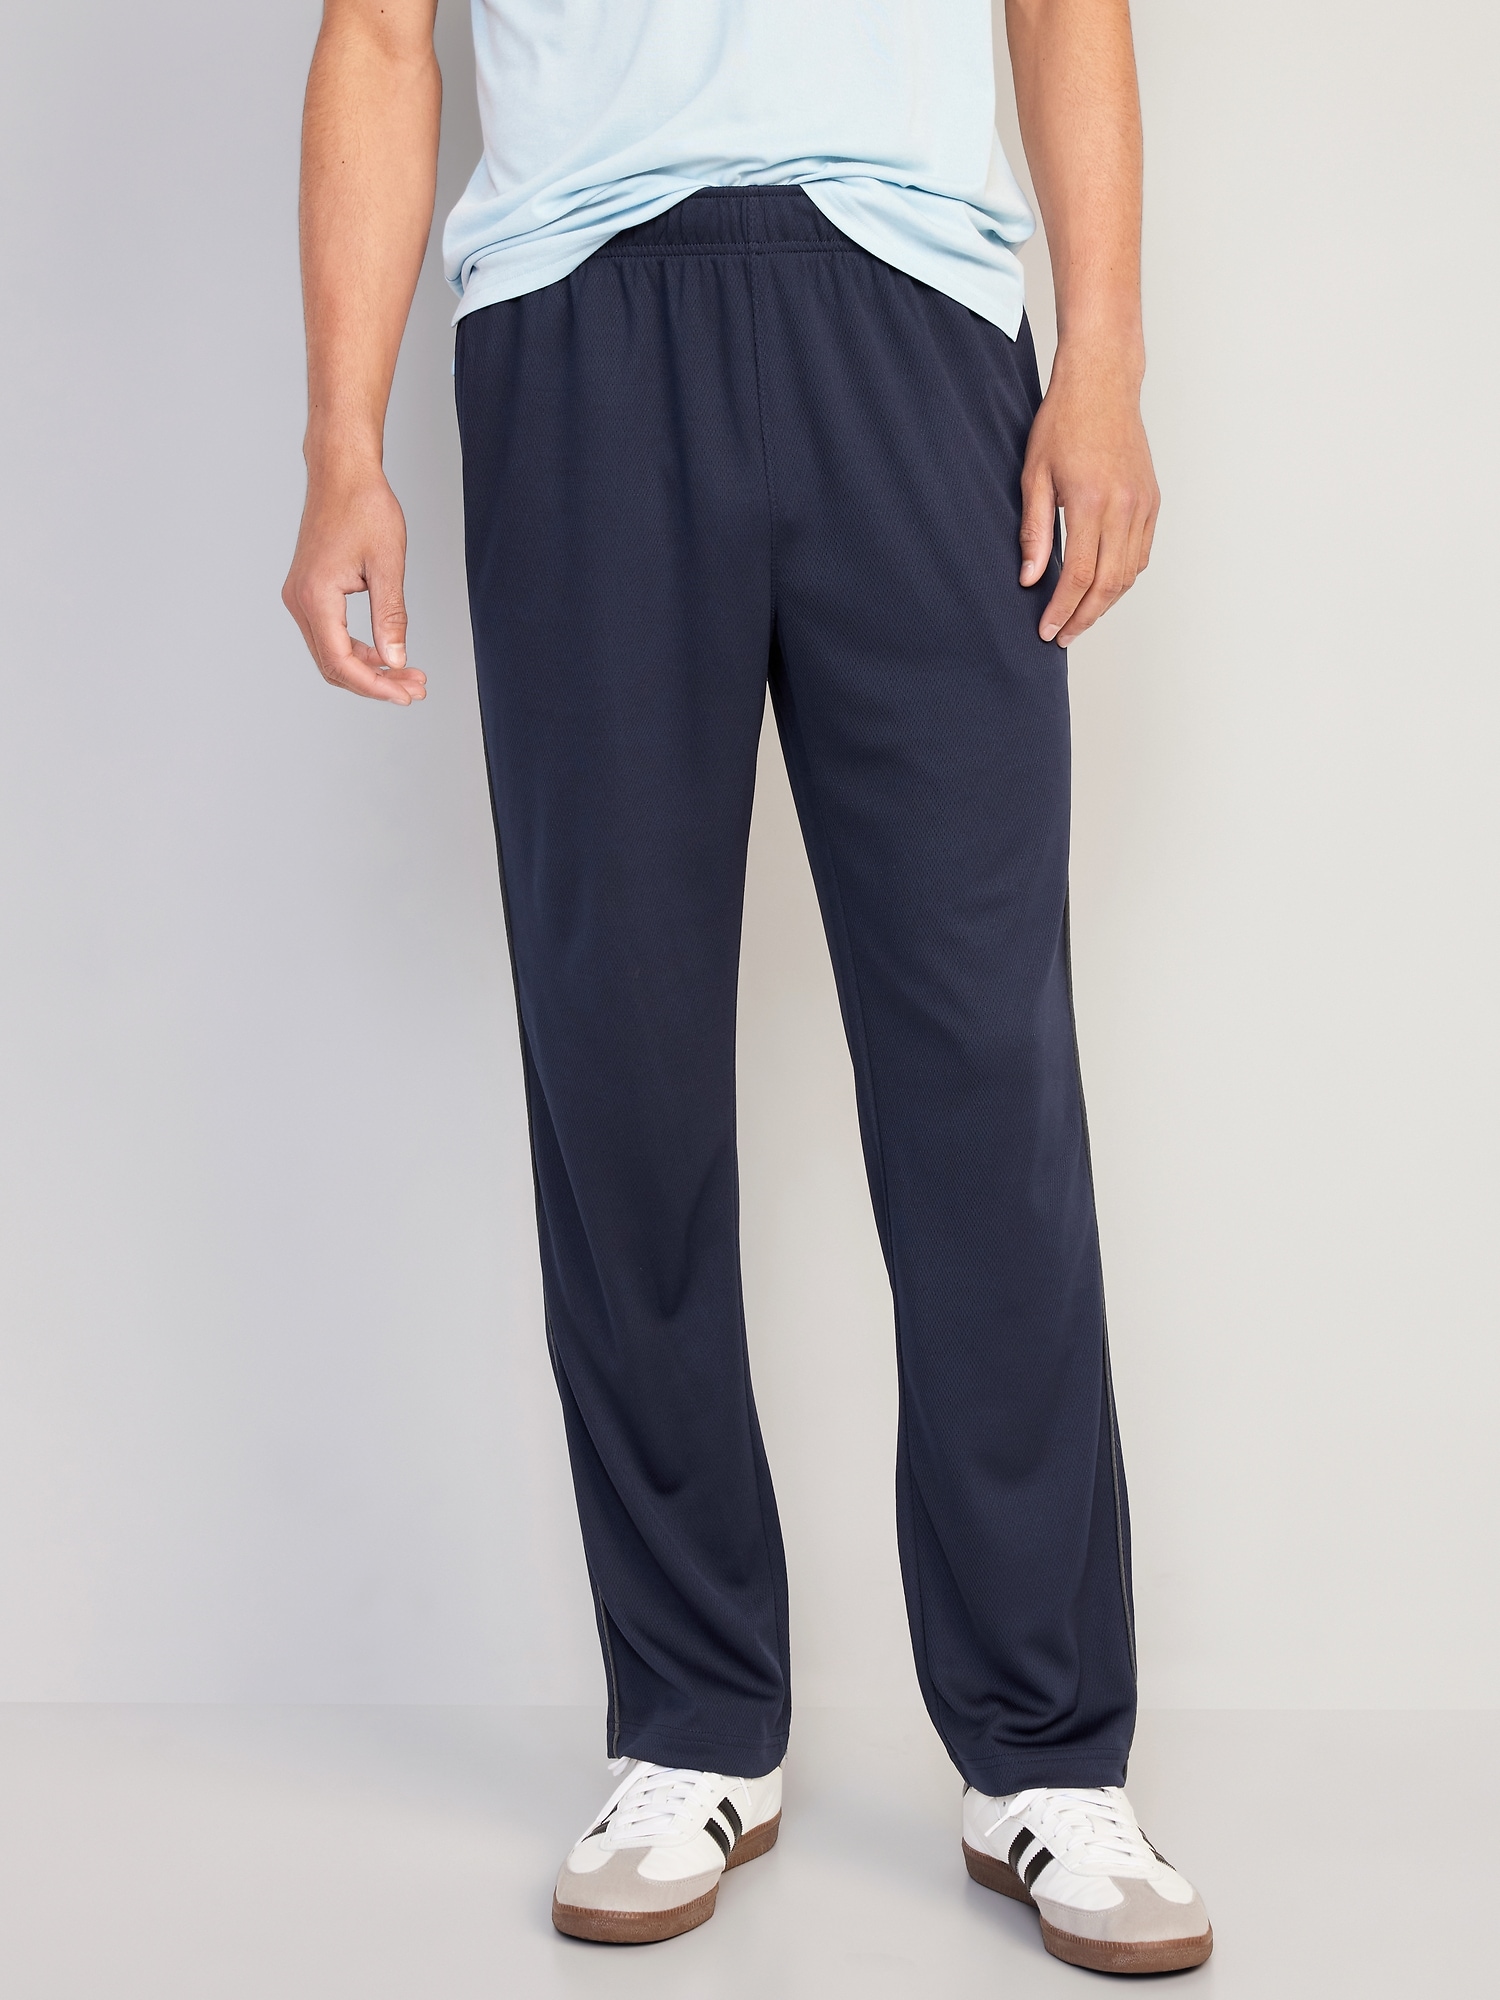 Buy Flying Machine Panelled Polyester Track Pants - NNNOW.com-cheohanoi.vn